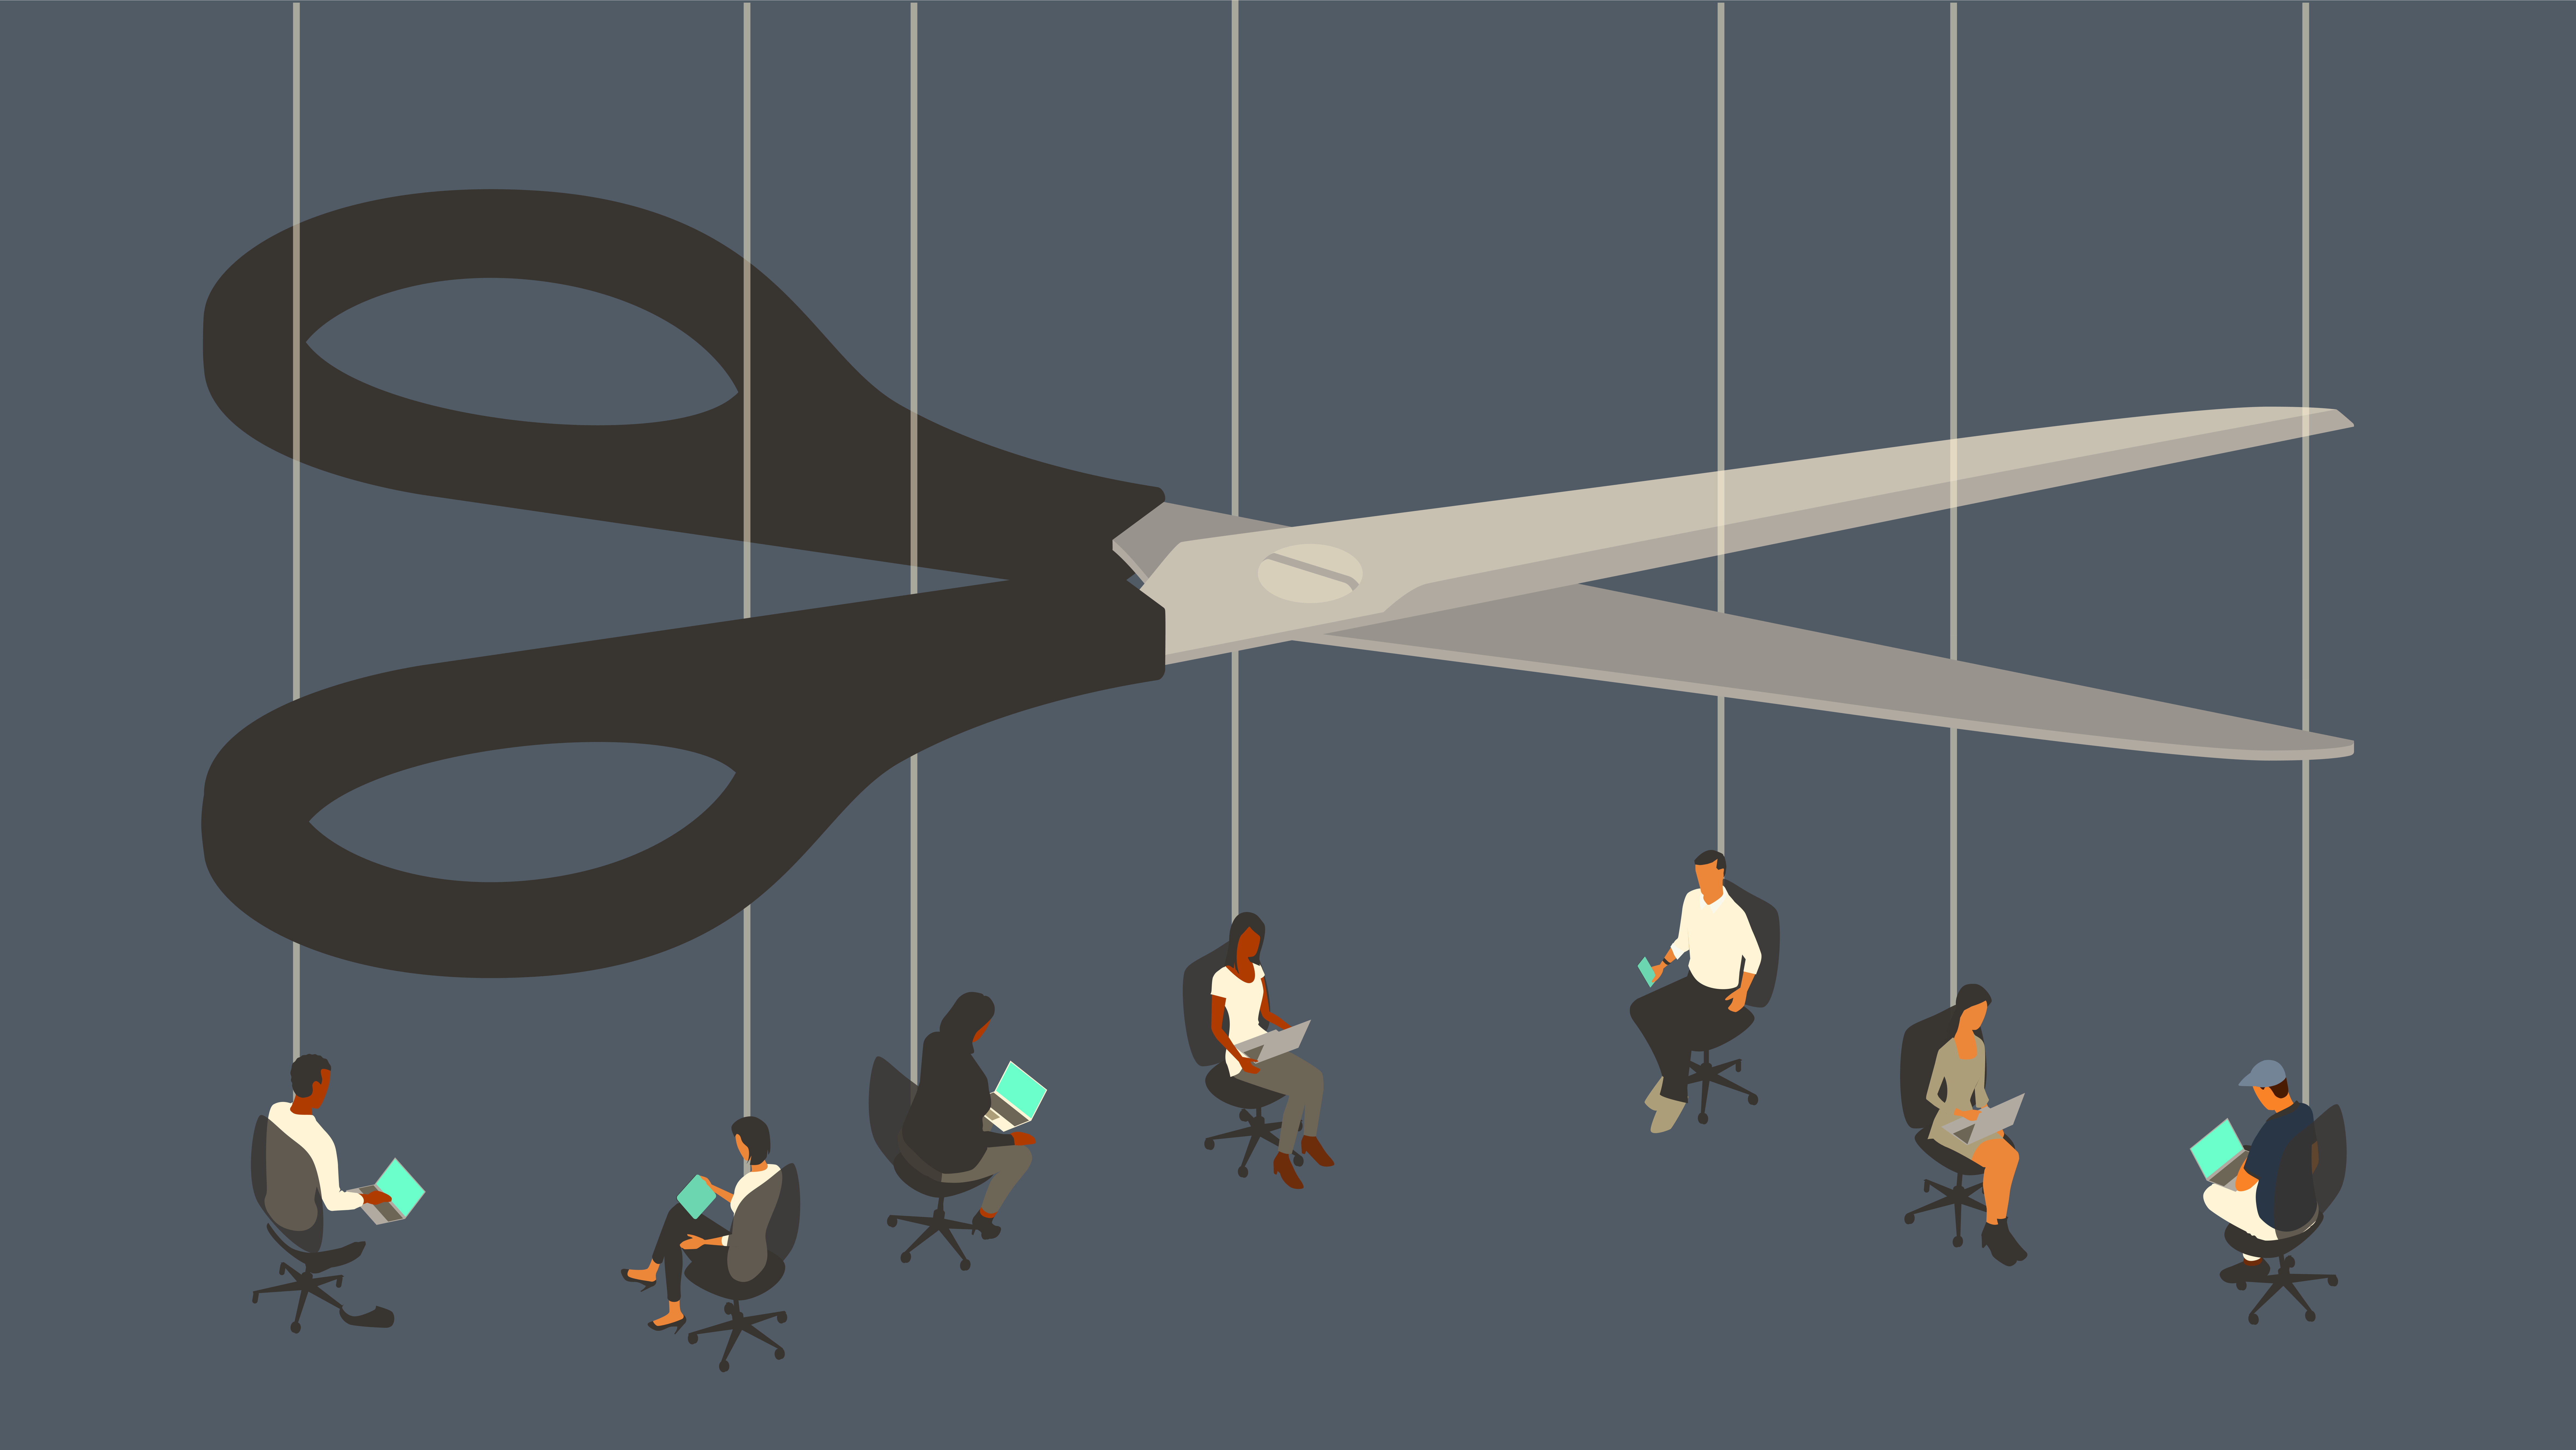 An illustration of a pair of scissors cutting strings attached to employees 